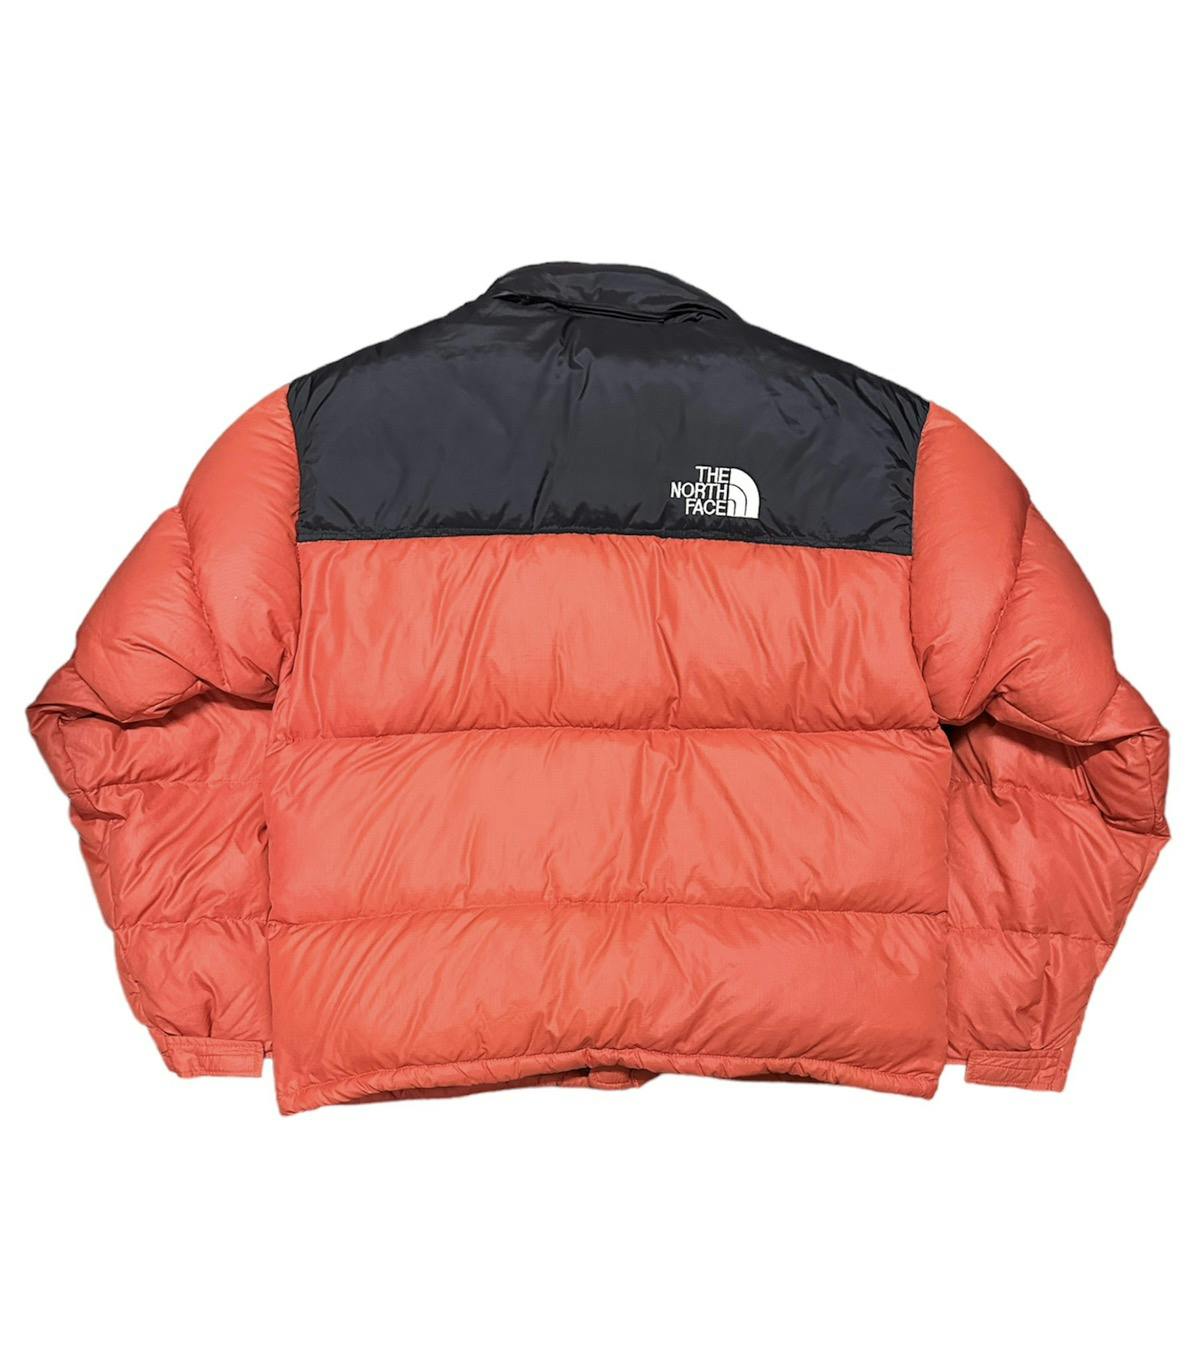 The north face puffer jacket - 2